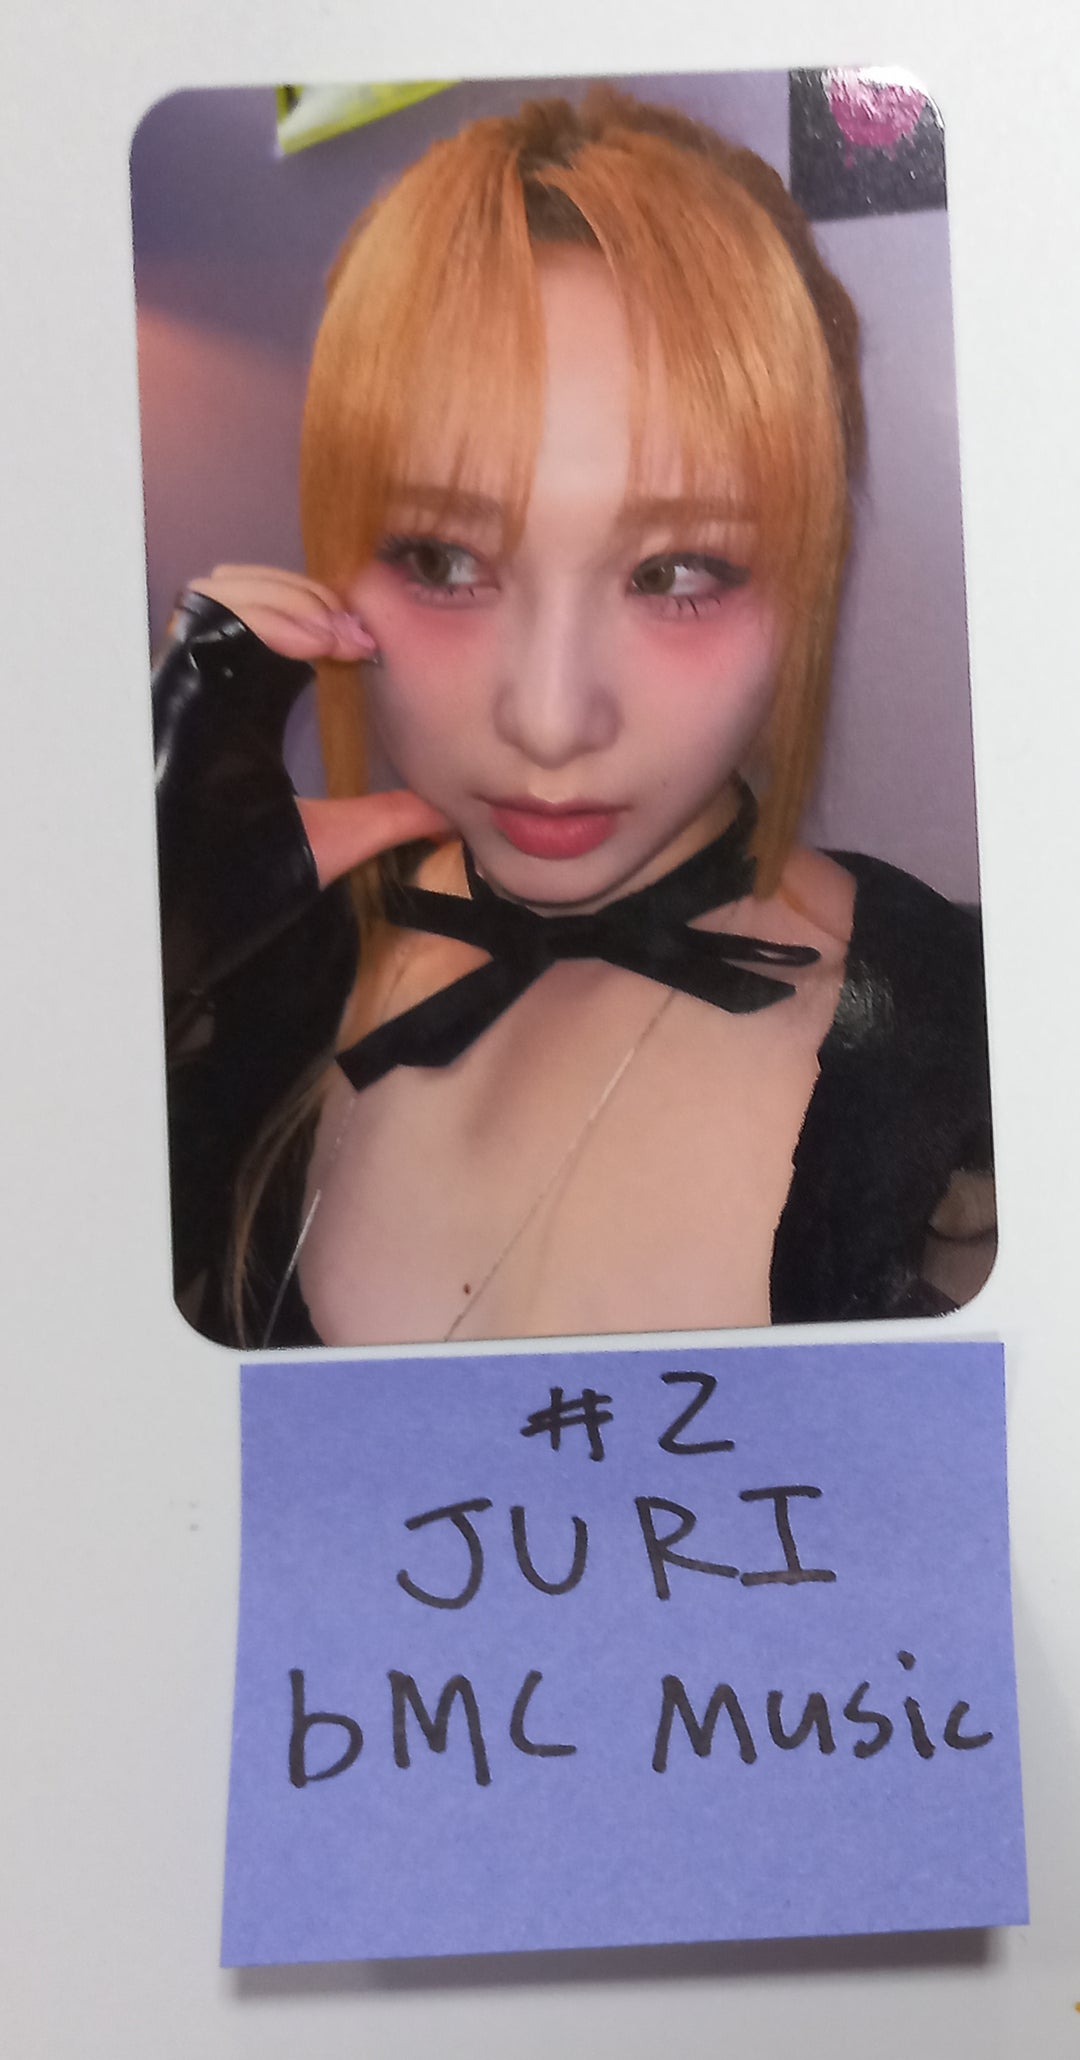 Rocket Punch 'Boom' - DMC Music Fansign Event Photocard [23.10.20]